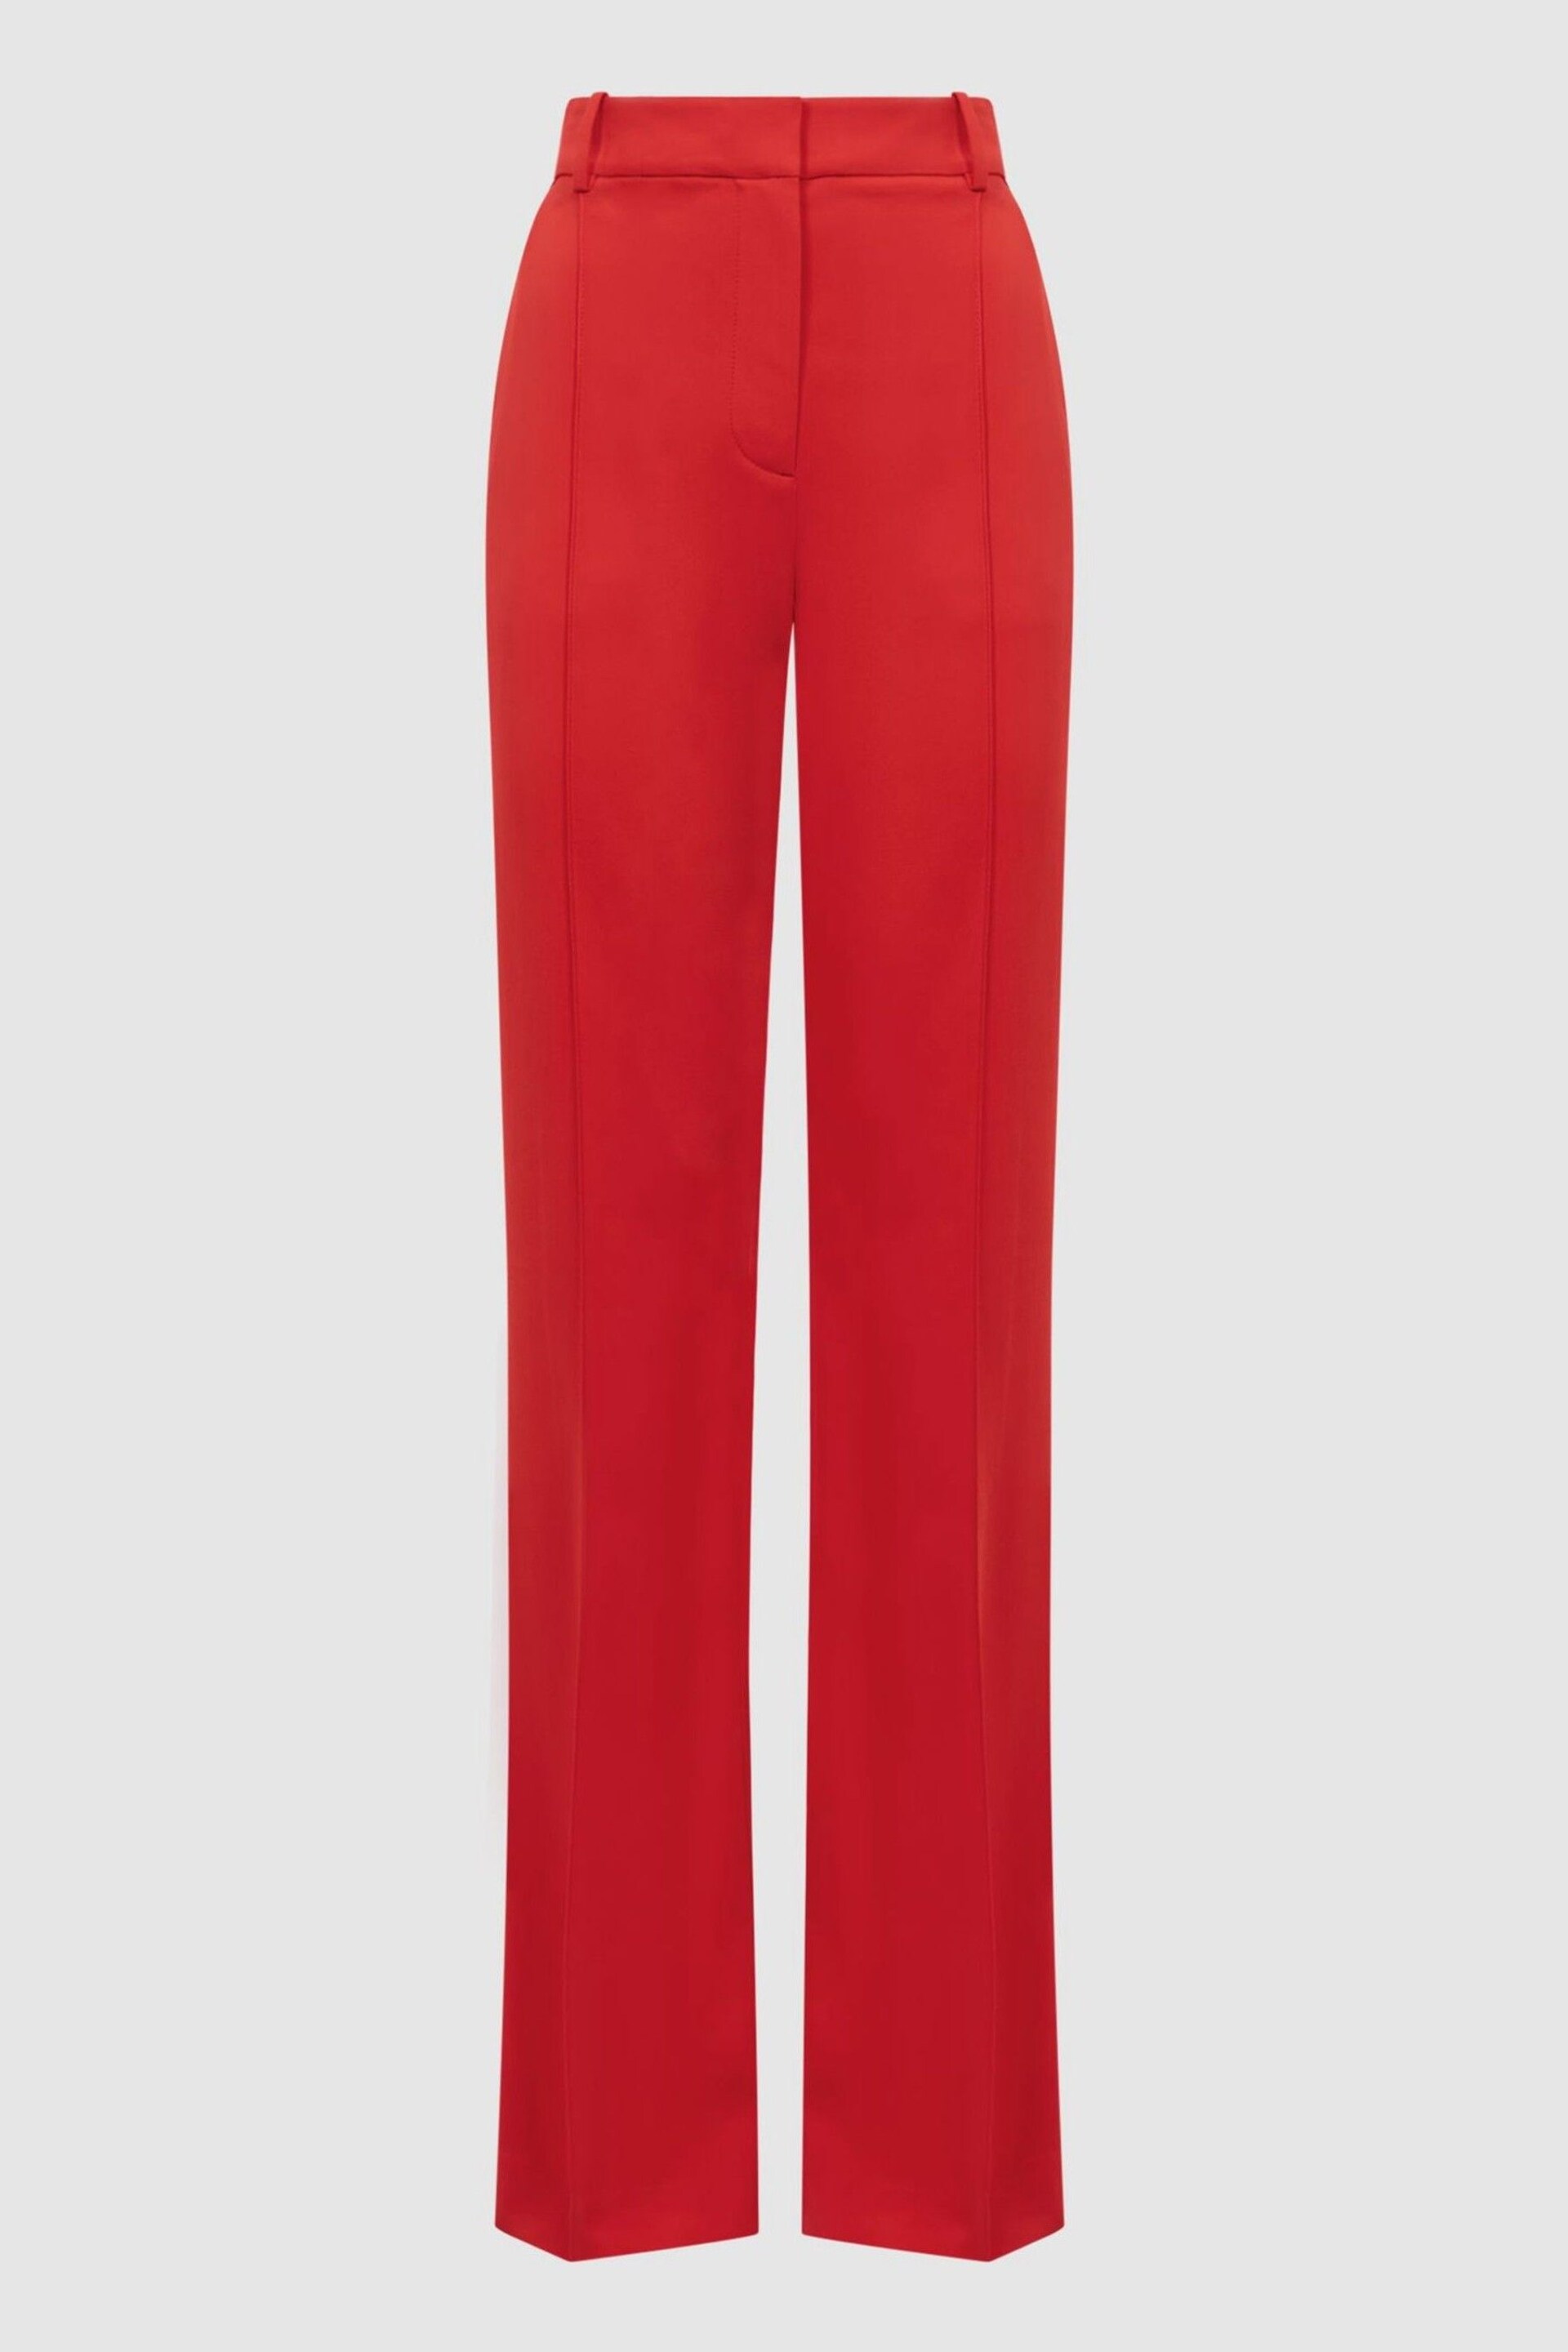 Reiss Coral Cara Wide Leg Mid Rise Trousers - Image 2 of 5